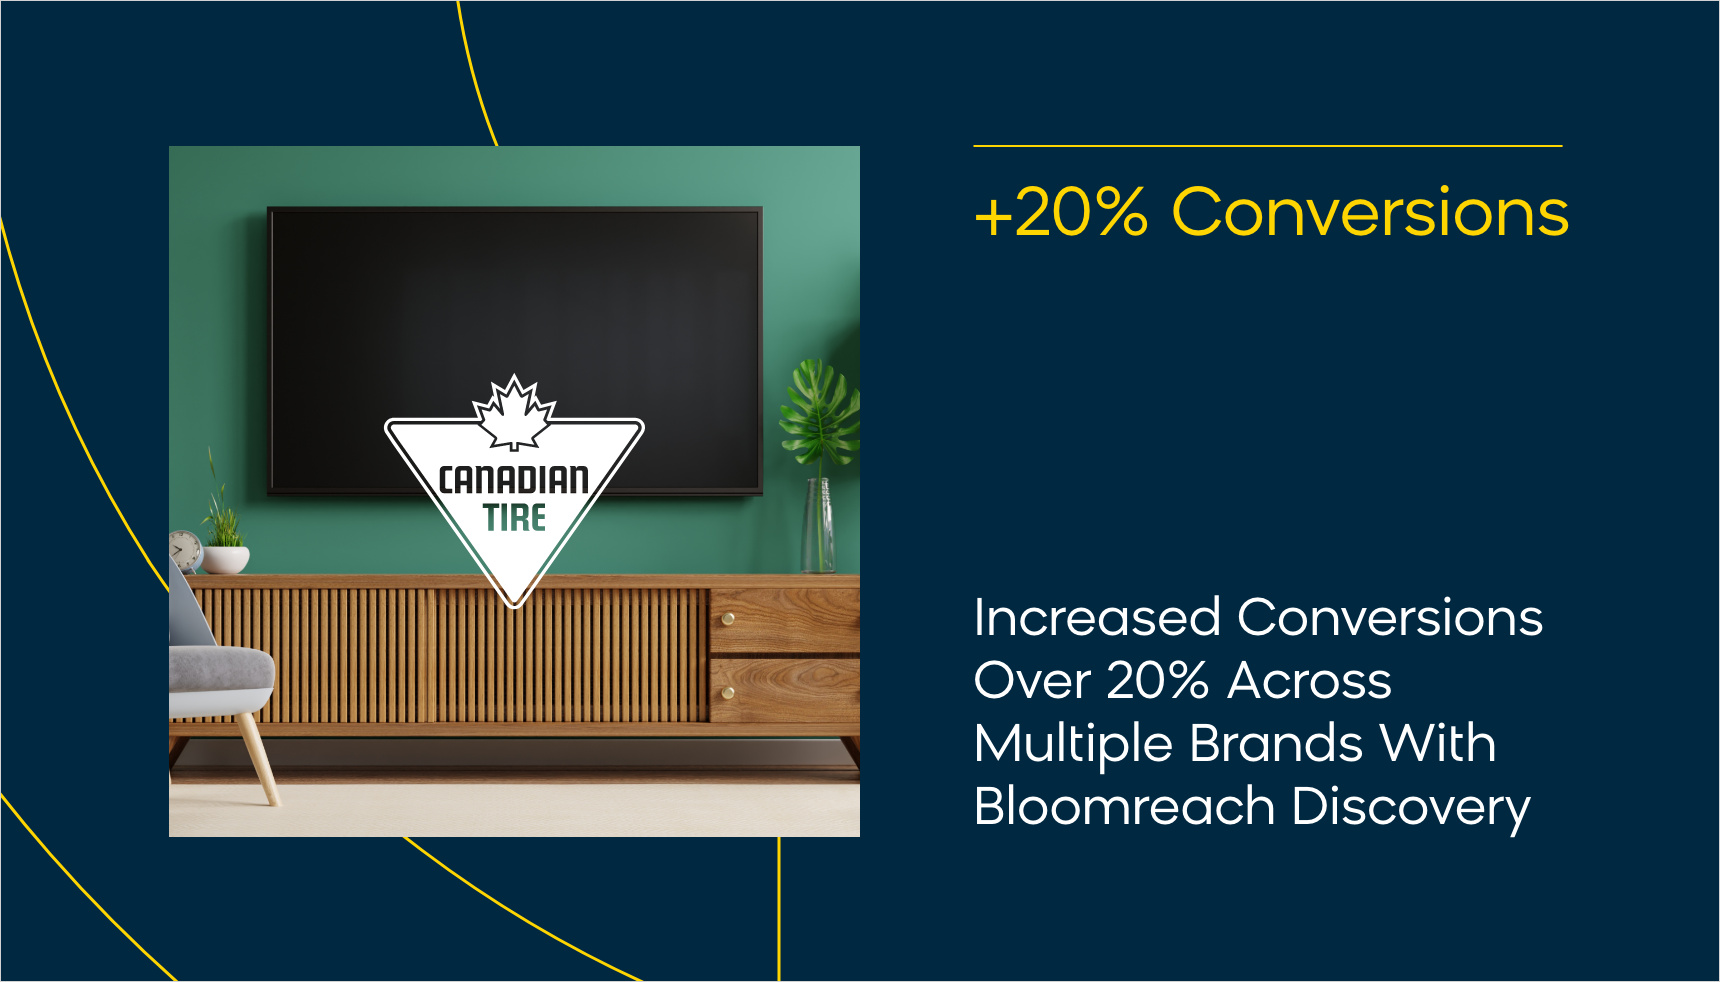 Canadian Tire Quote and Customer Results with Bloomreach Discovery